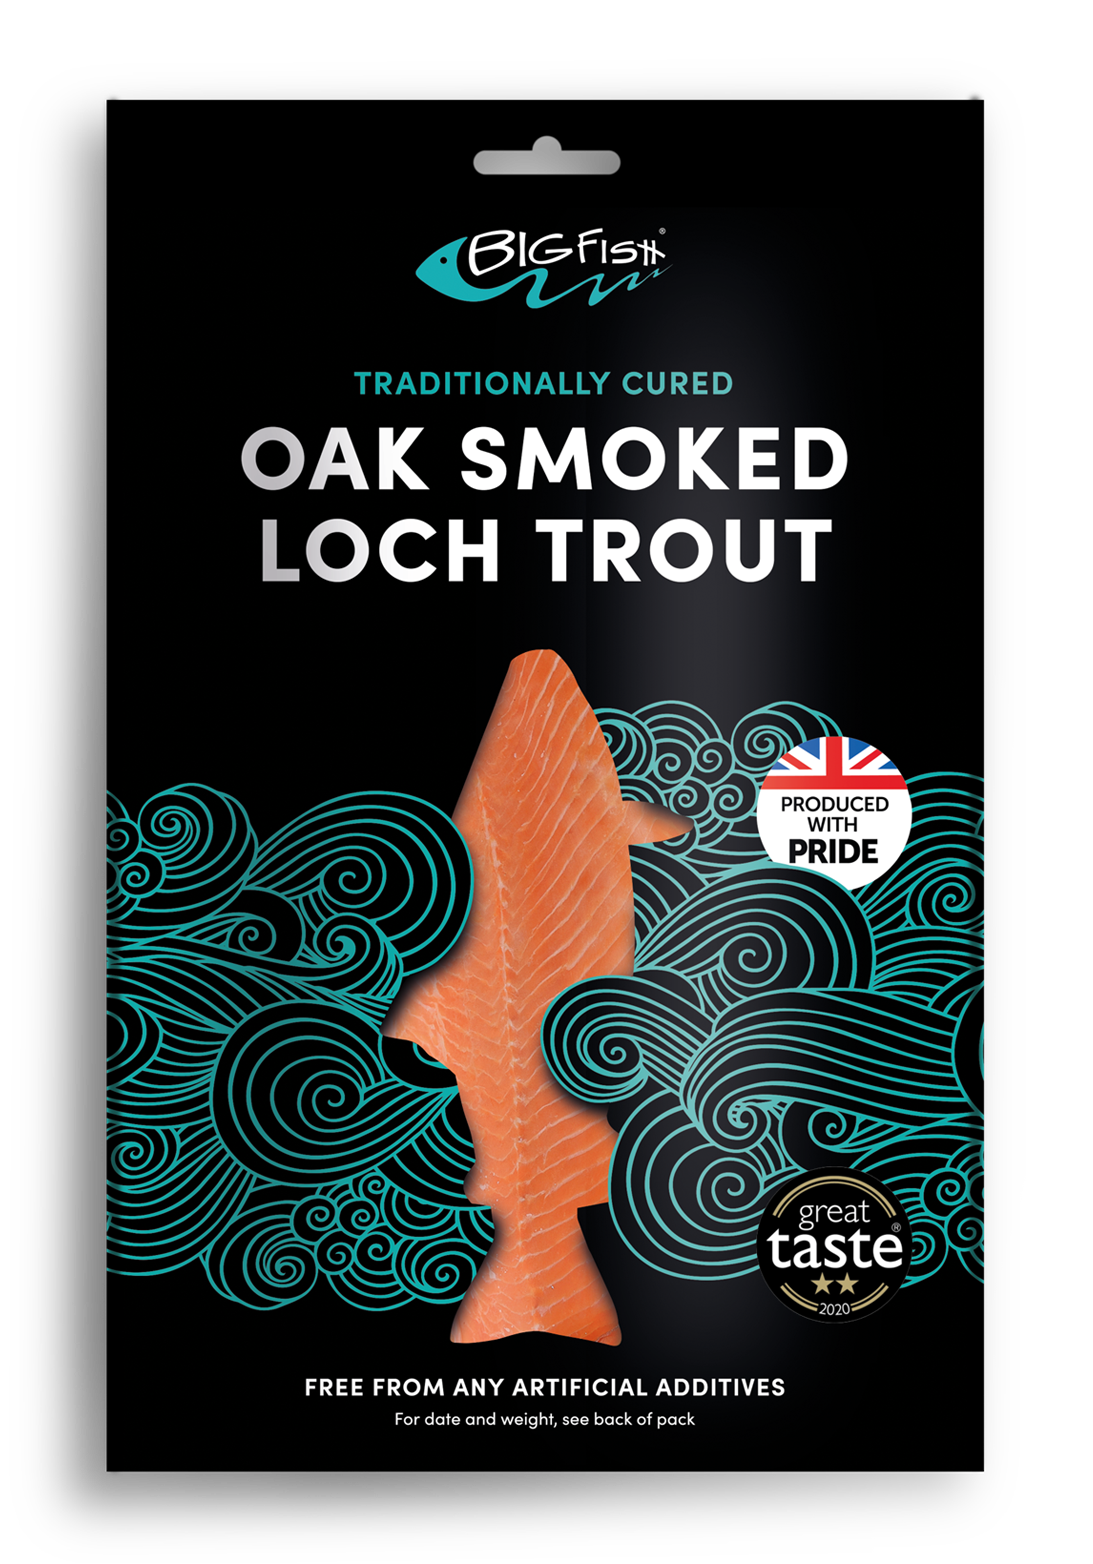 https://www.bigfishbrand.co.uk/assets/images/products/oak-smoked-loch-trout-new.png